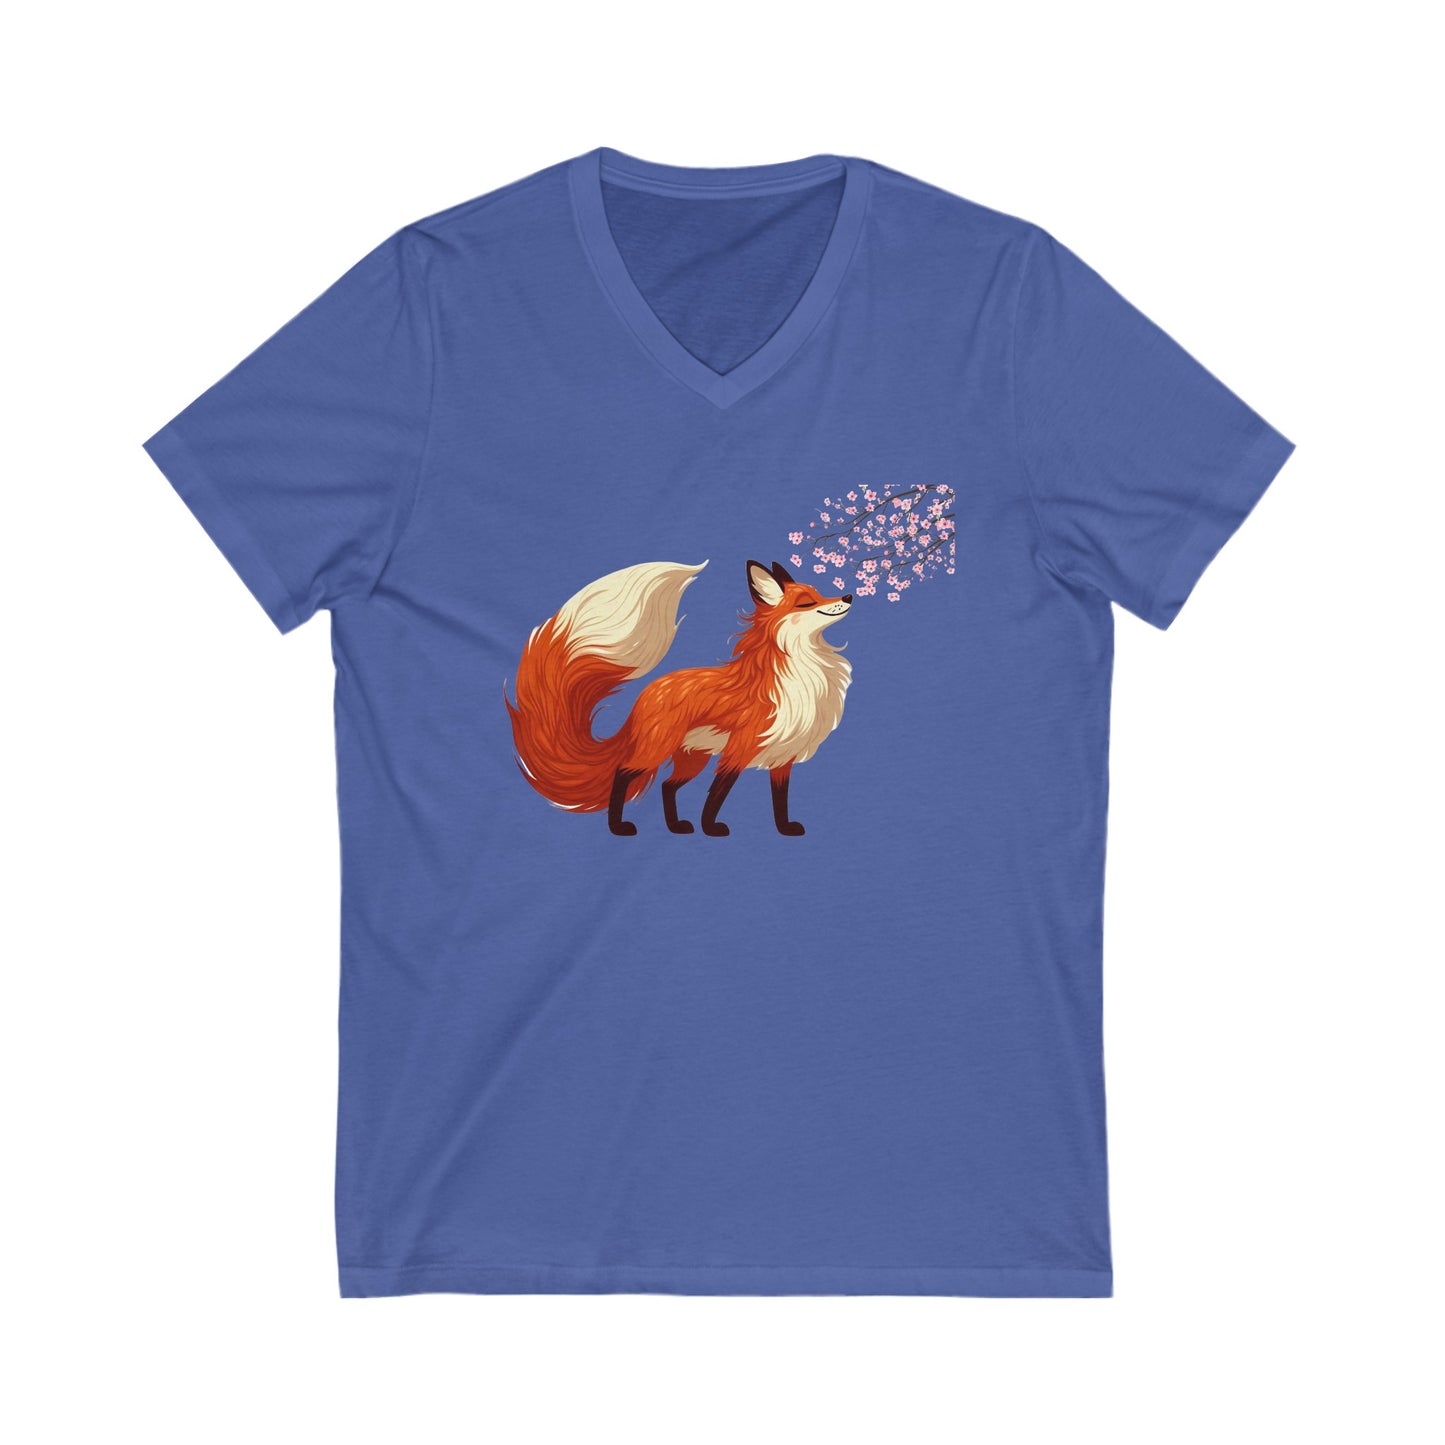 Red Fox Under A Cherry Blossom Tree Graphic T-shirt